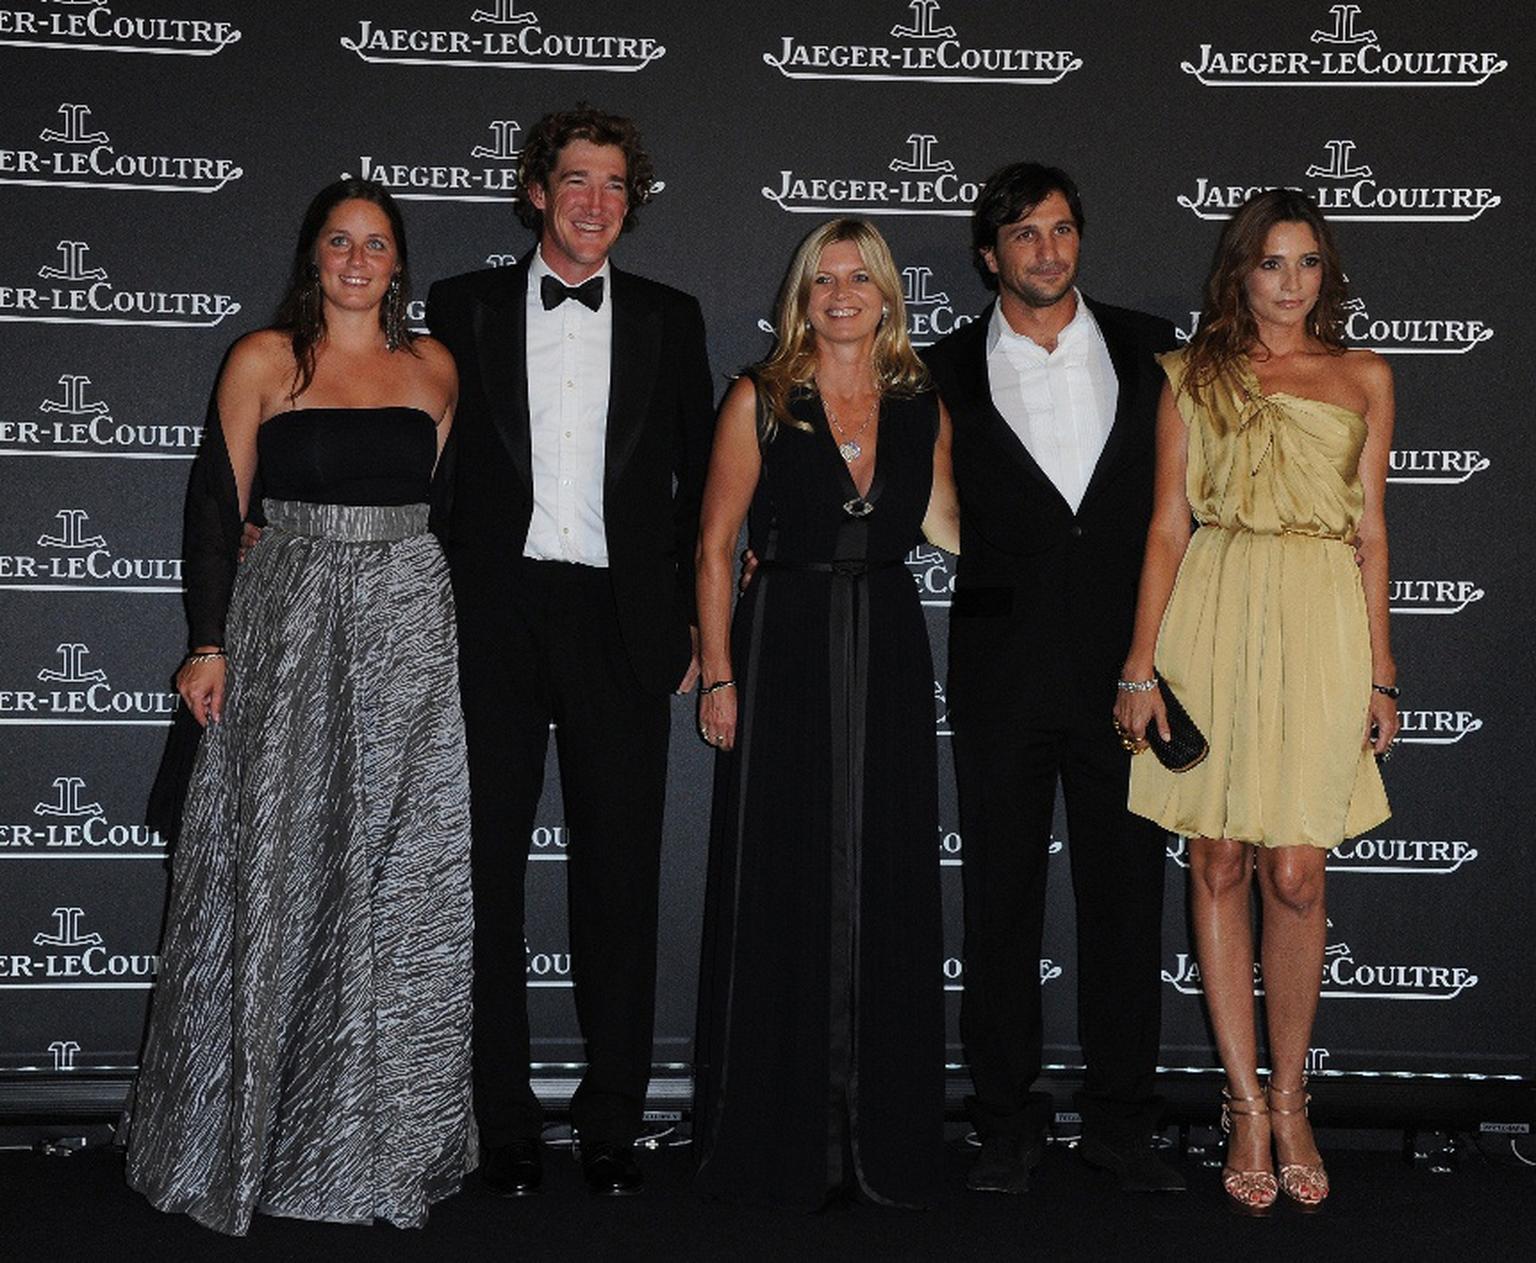 JLC-Luke-Tomlinson-with-his-fiancee,marchioness-of-Milford-Haven,-Eduardo-Novillo-Astrada-and-Astrid-Munoz-at-Jaeger-LeCoultre-Rendez-Vous-in-Venice.jpg